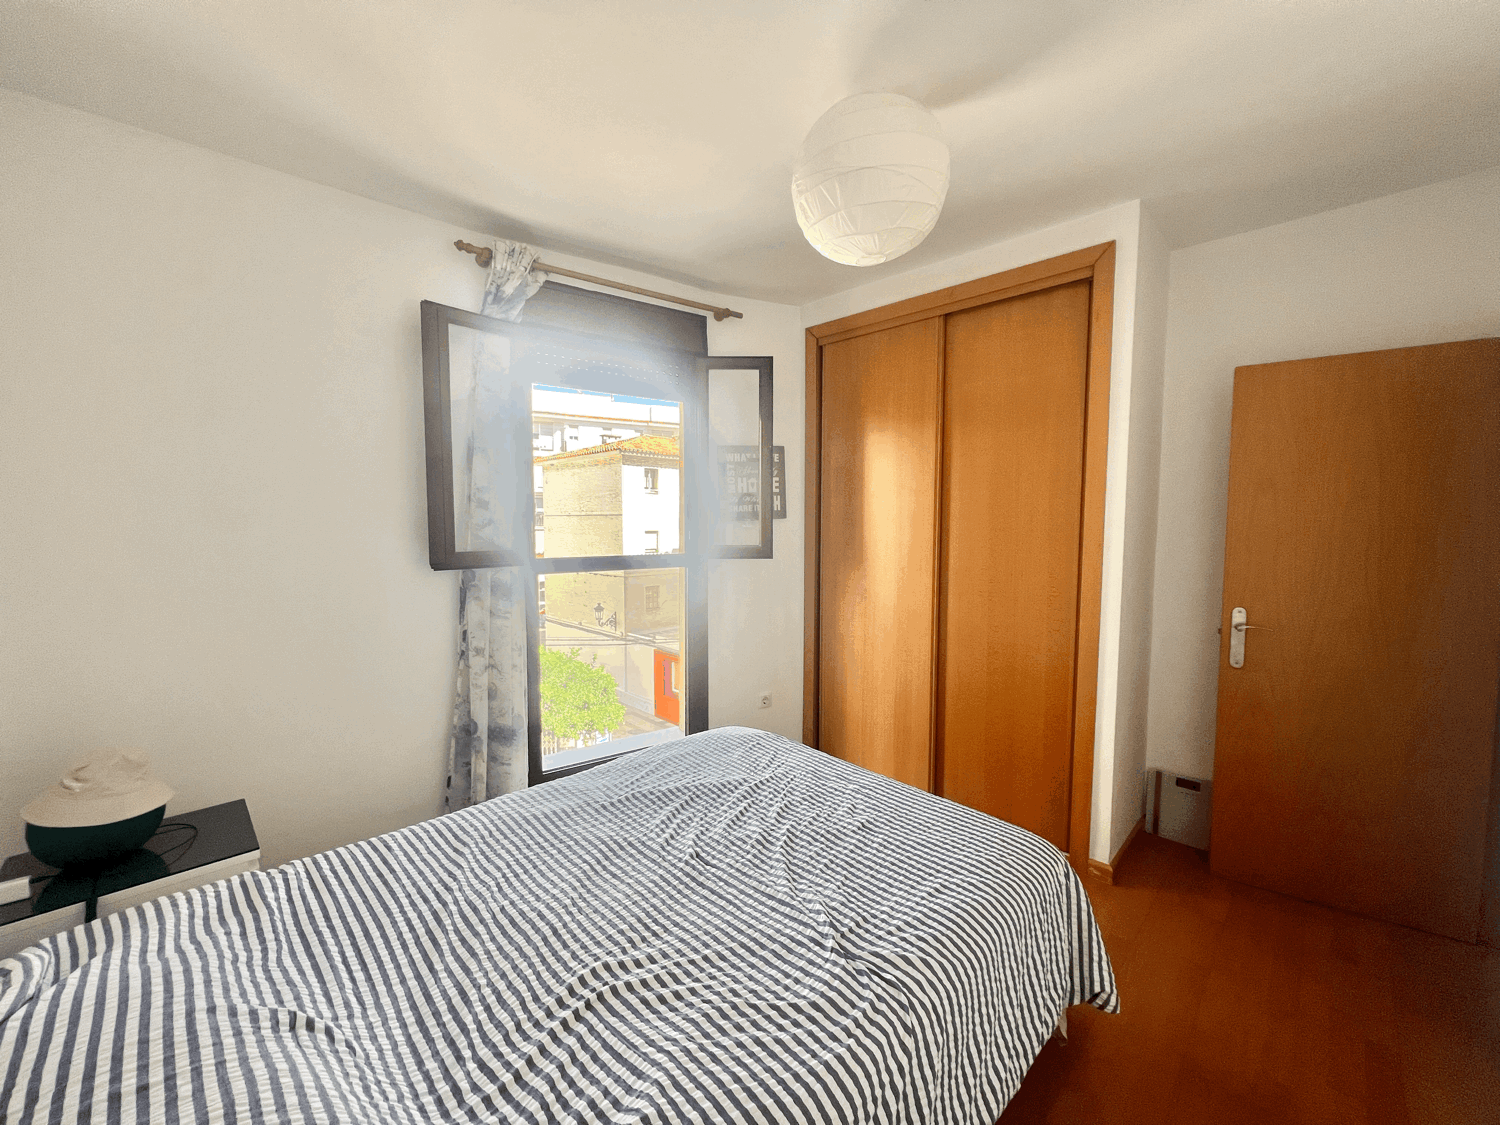 City center two bedrooms flat in Estepona